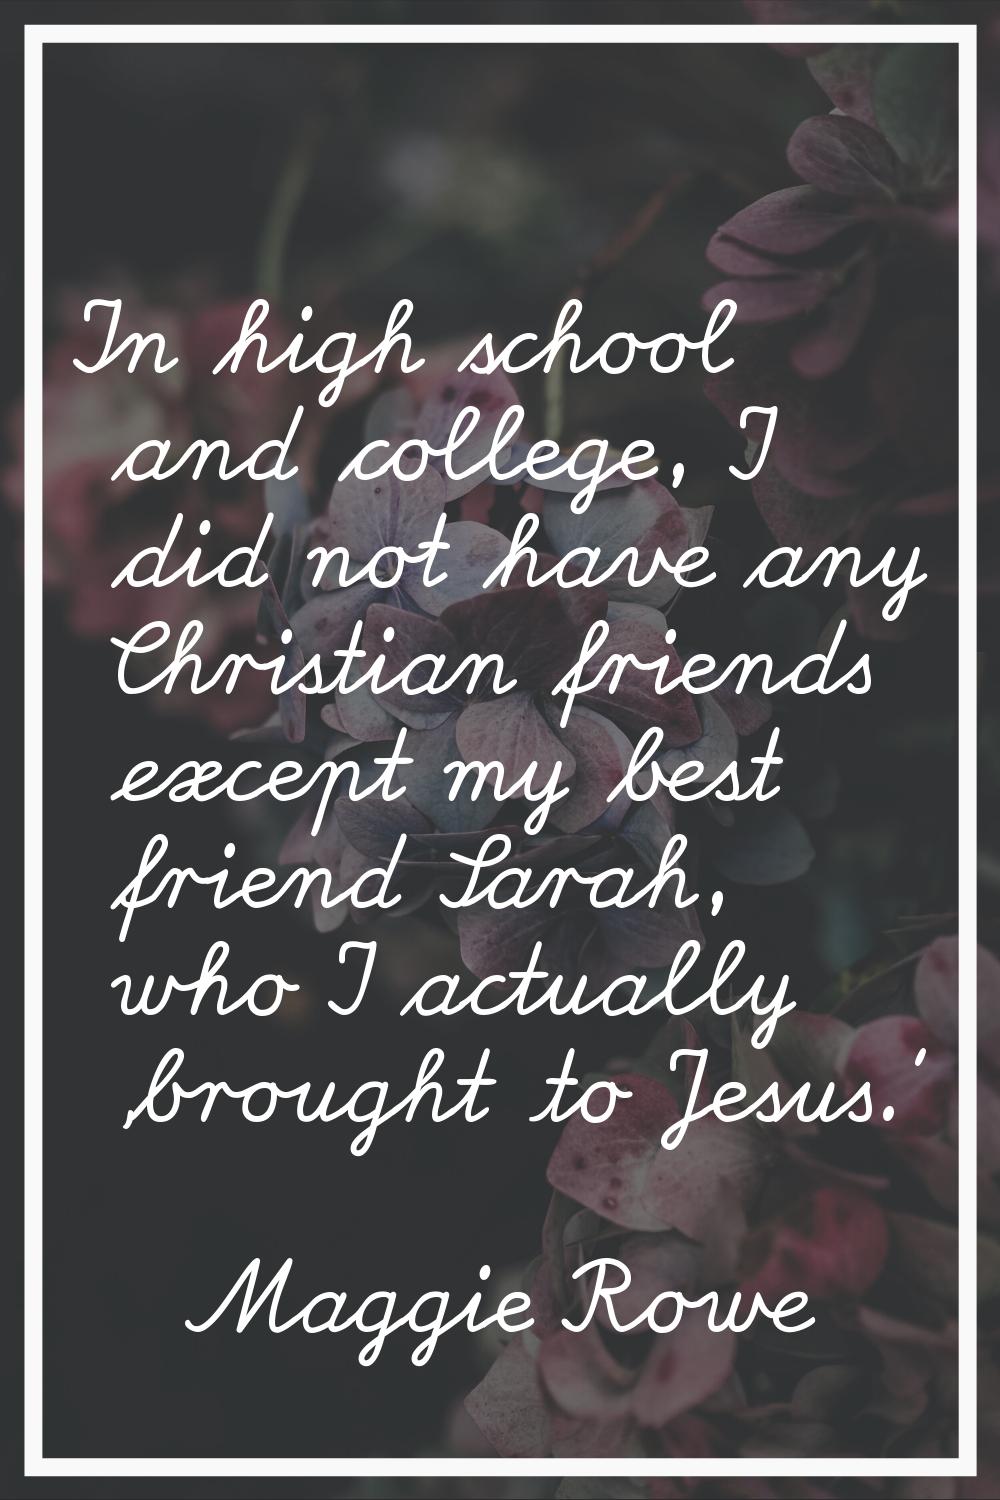 In high school and college, I did not have any Christian friends except my best friend Sarah, who I